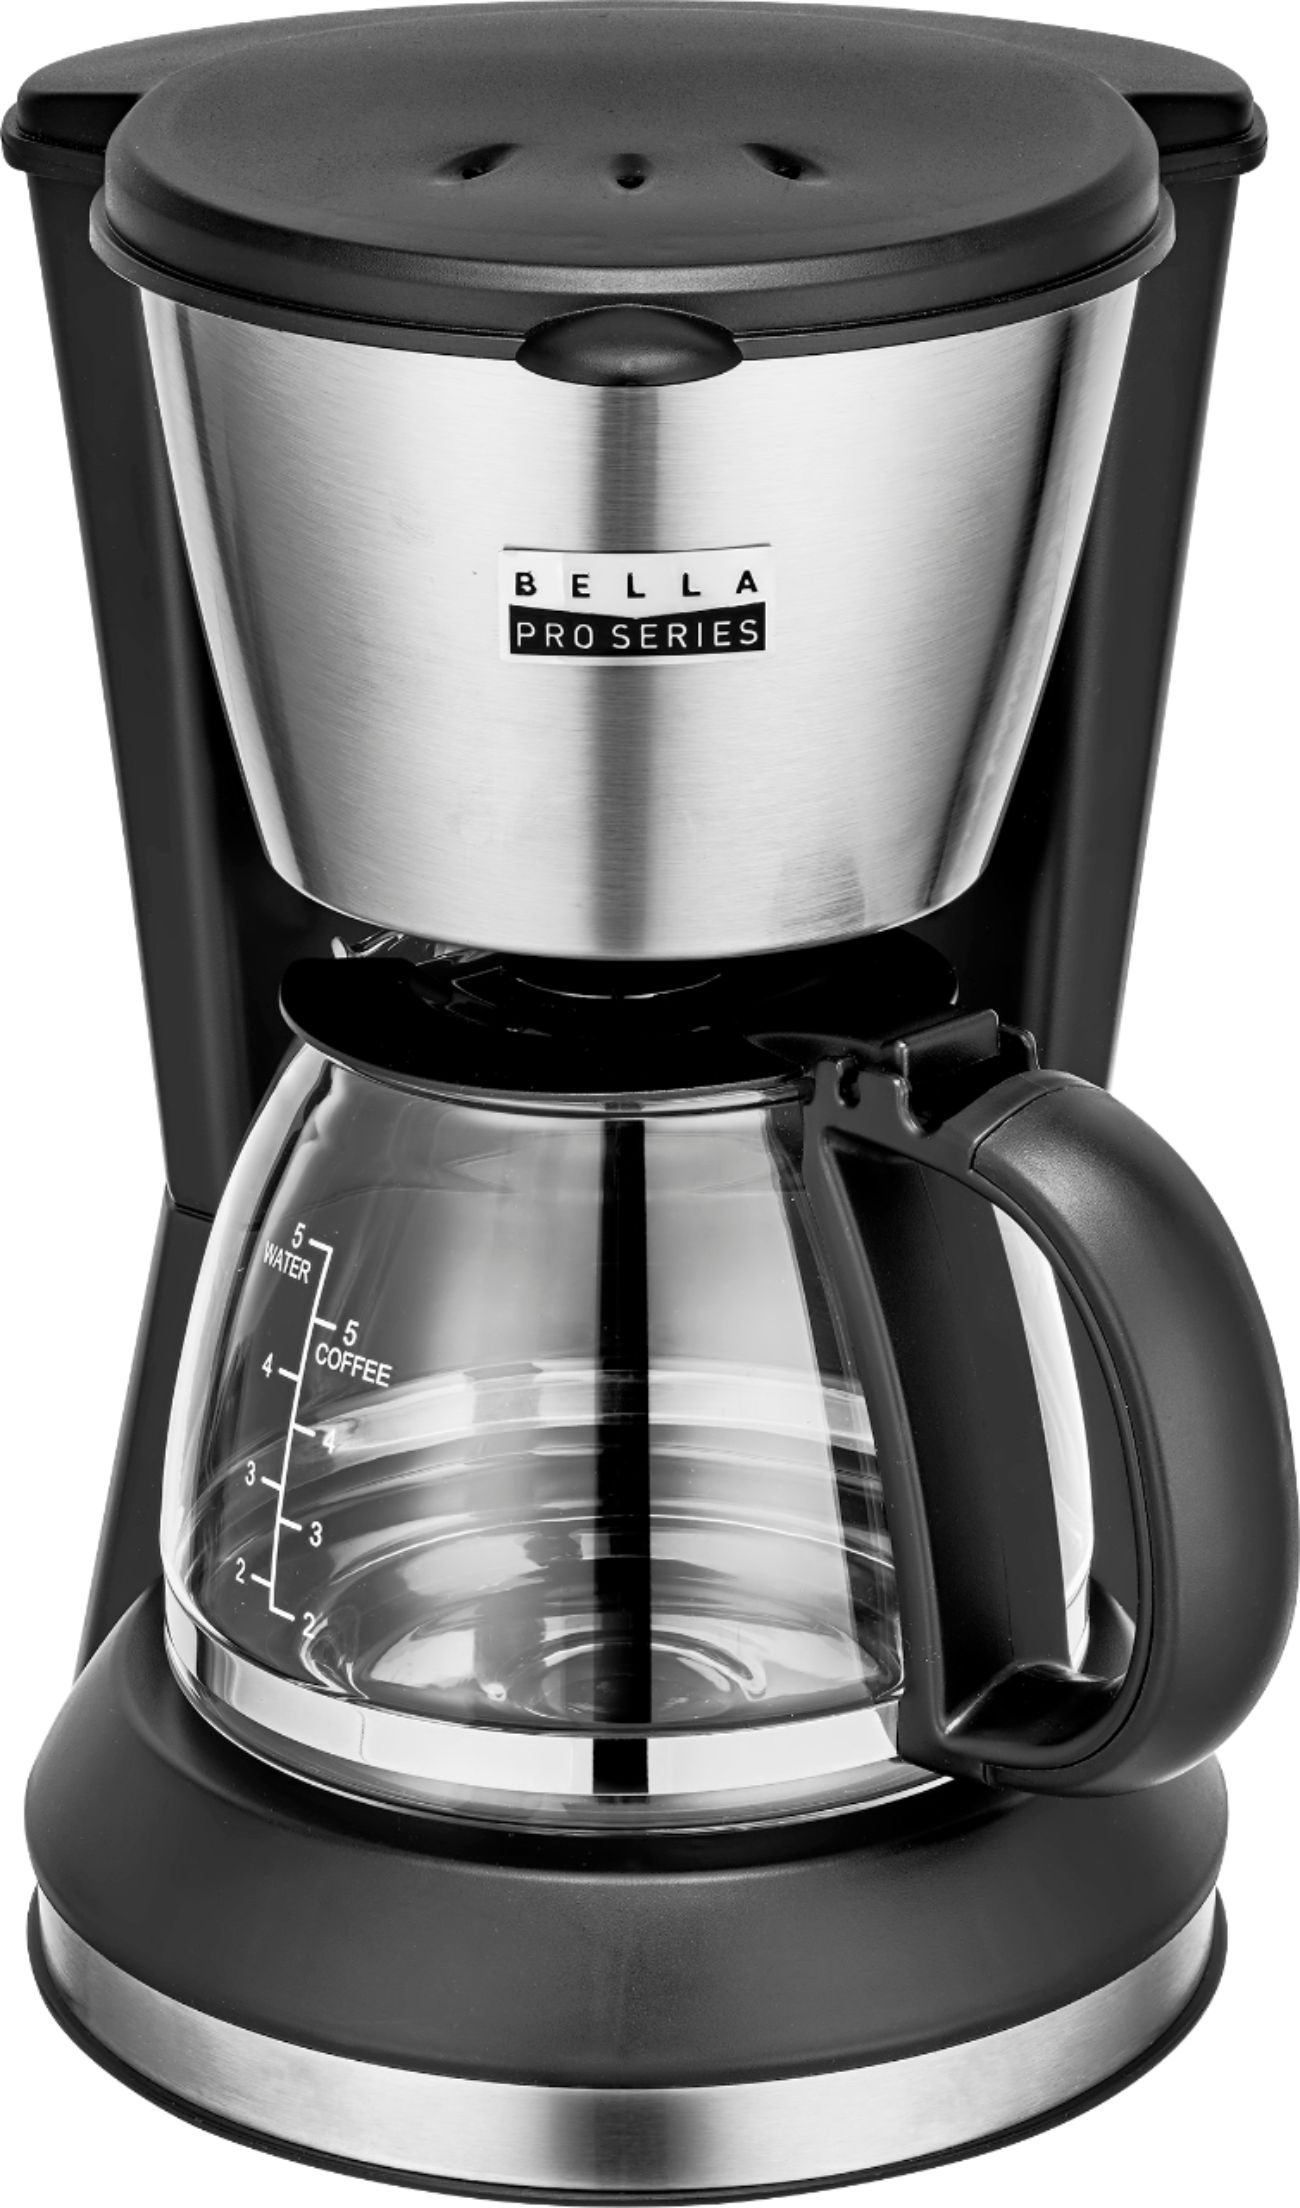 Bella Pro Series 5-Cup Coffee Maker (Stainless Steel Finish)